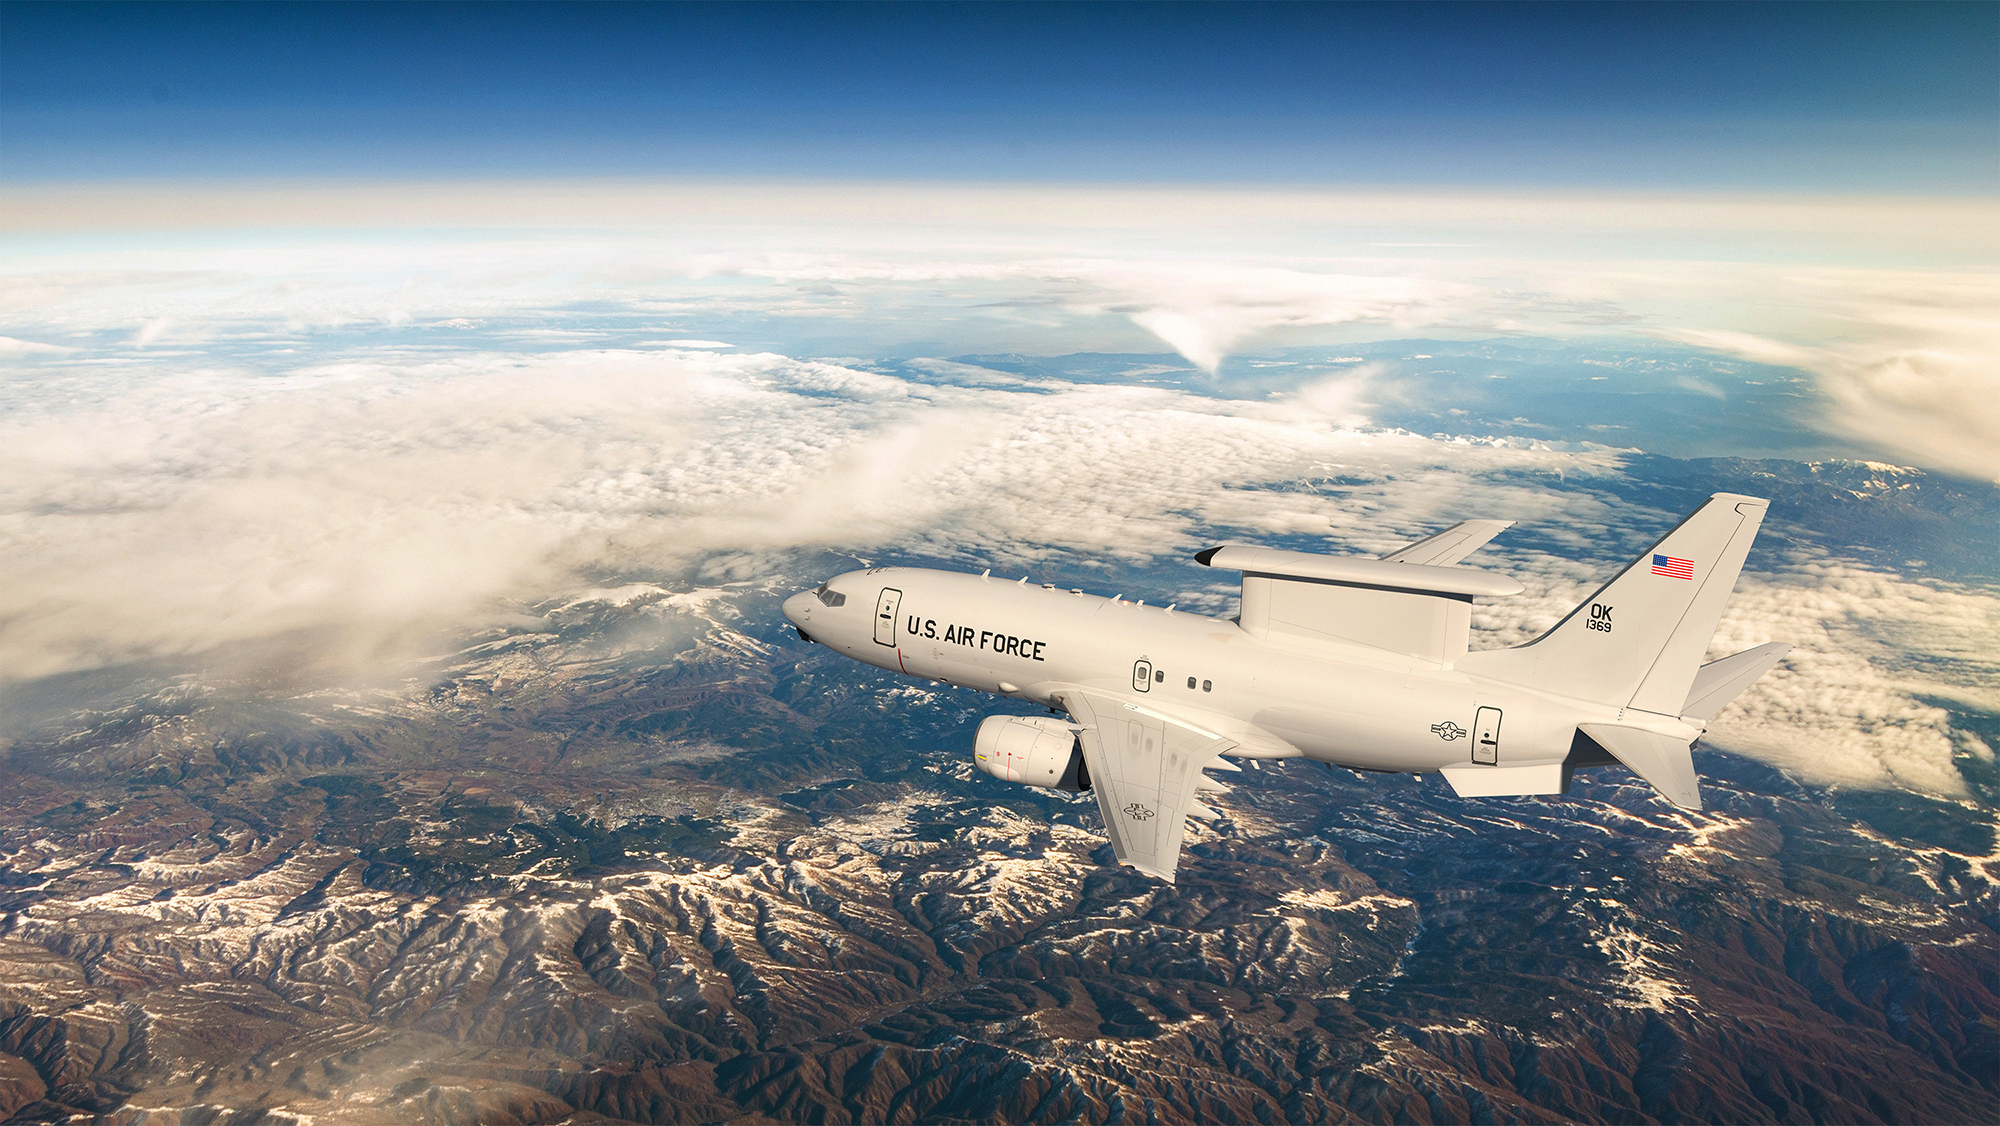 How US, UK, and Australia Aim to Cut Costs, Speed Delivery of E-7 Wedgetail